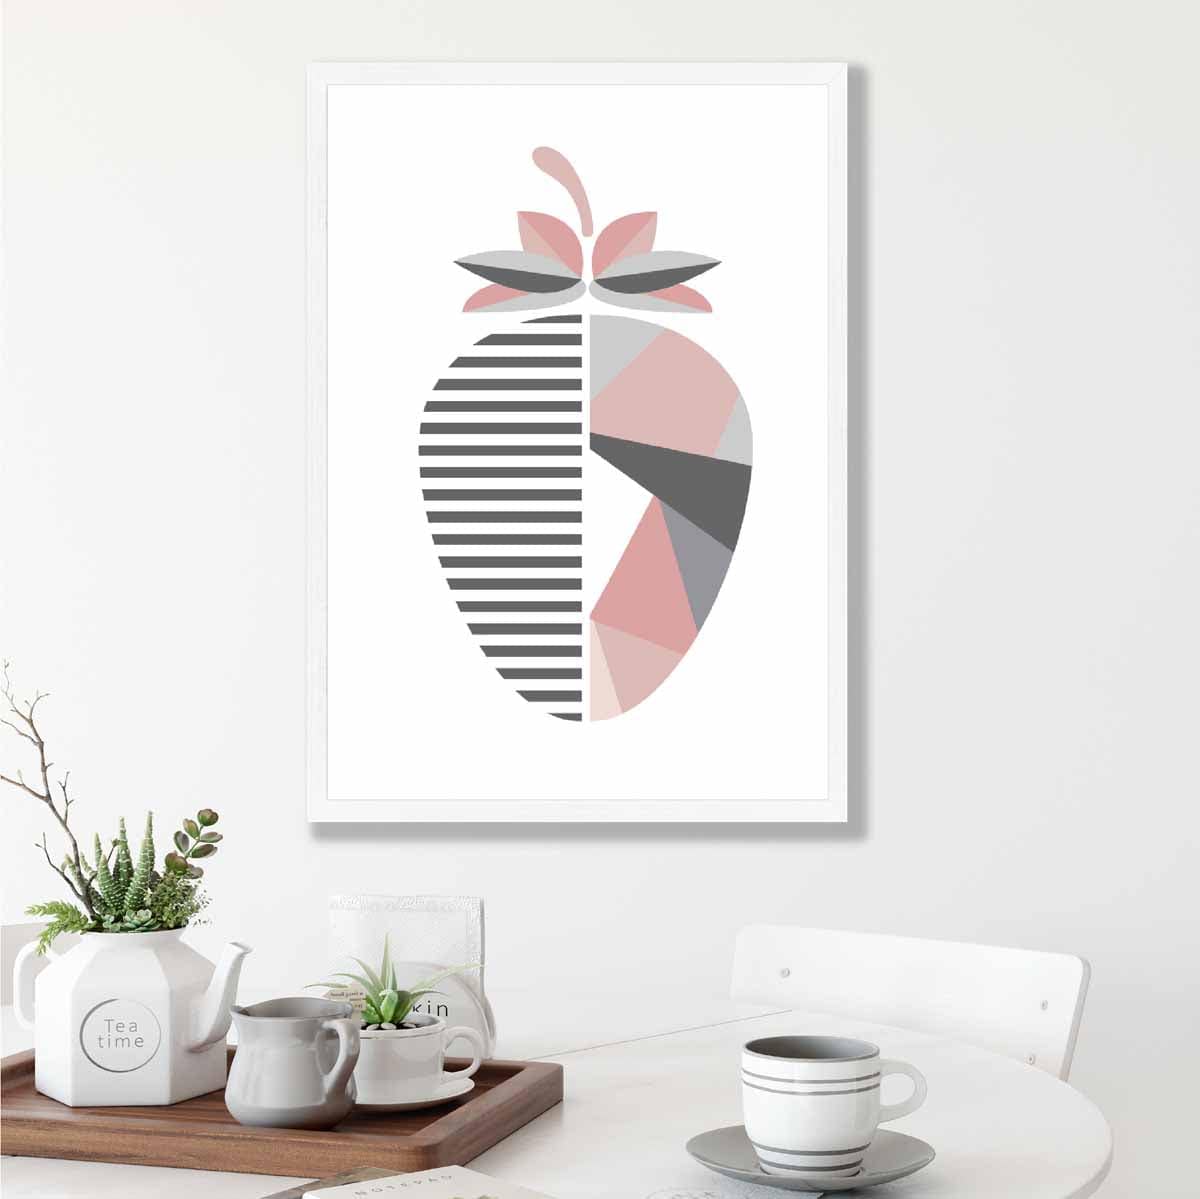 Geometric Fruit Poster of a Strawberry in Blush Pink and Grey